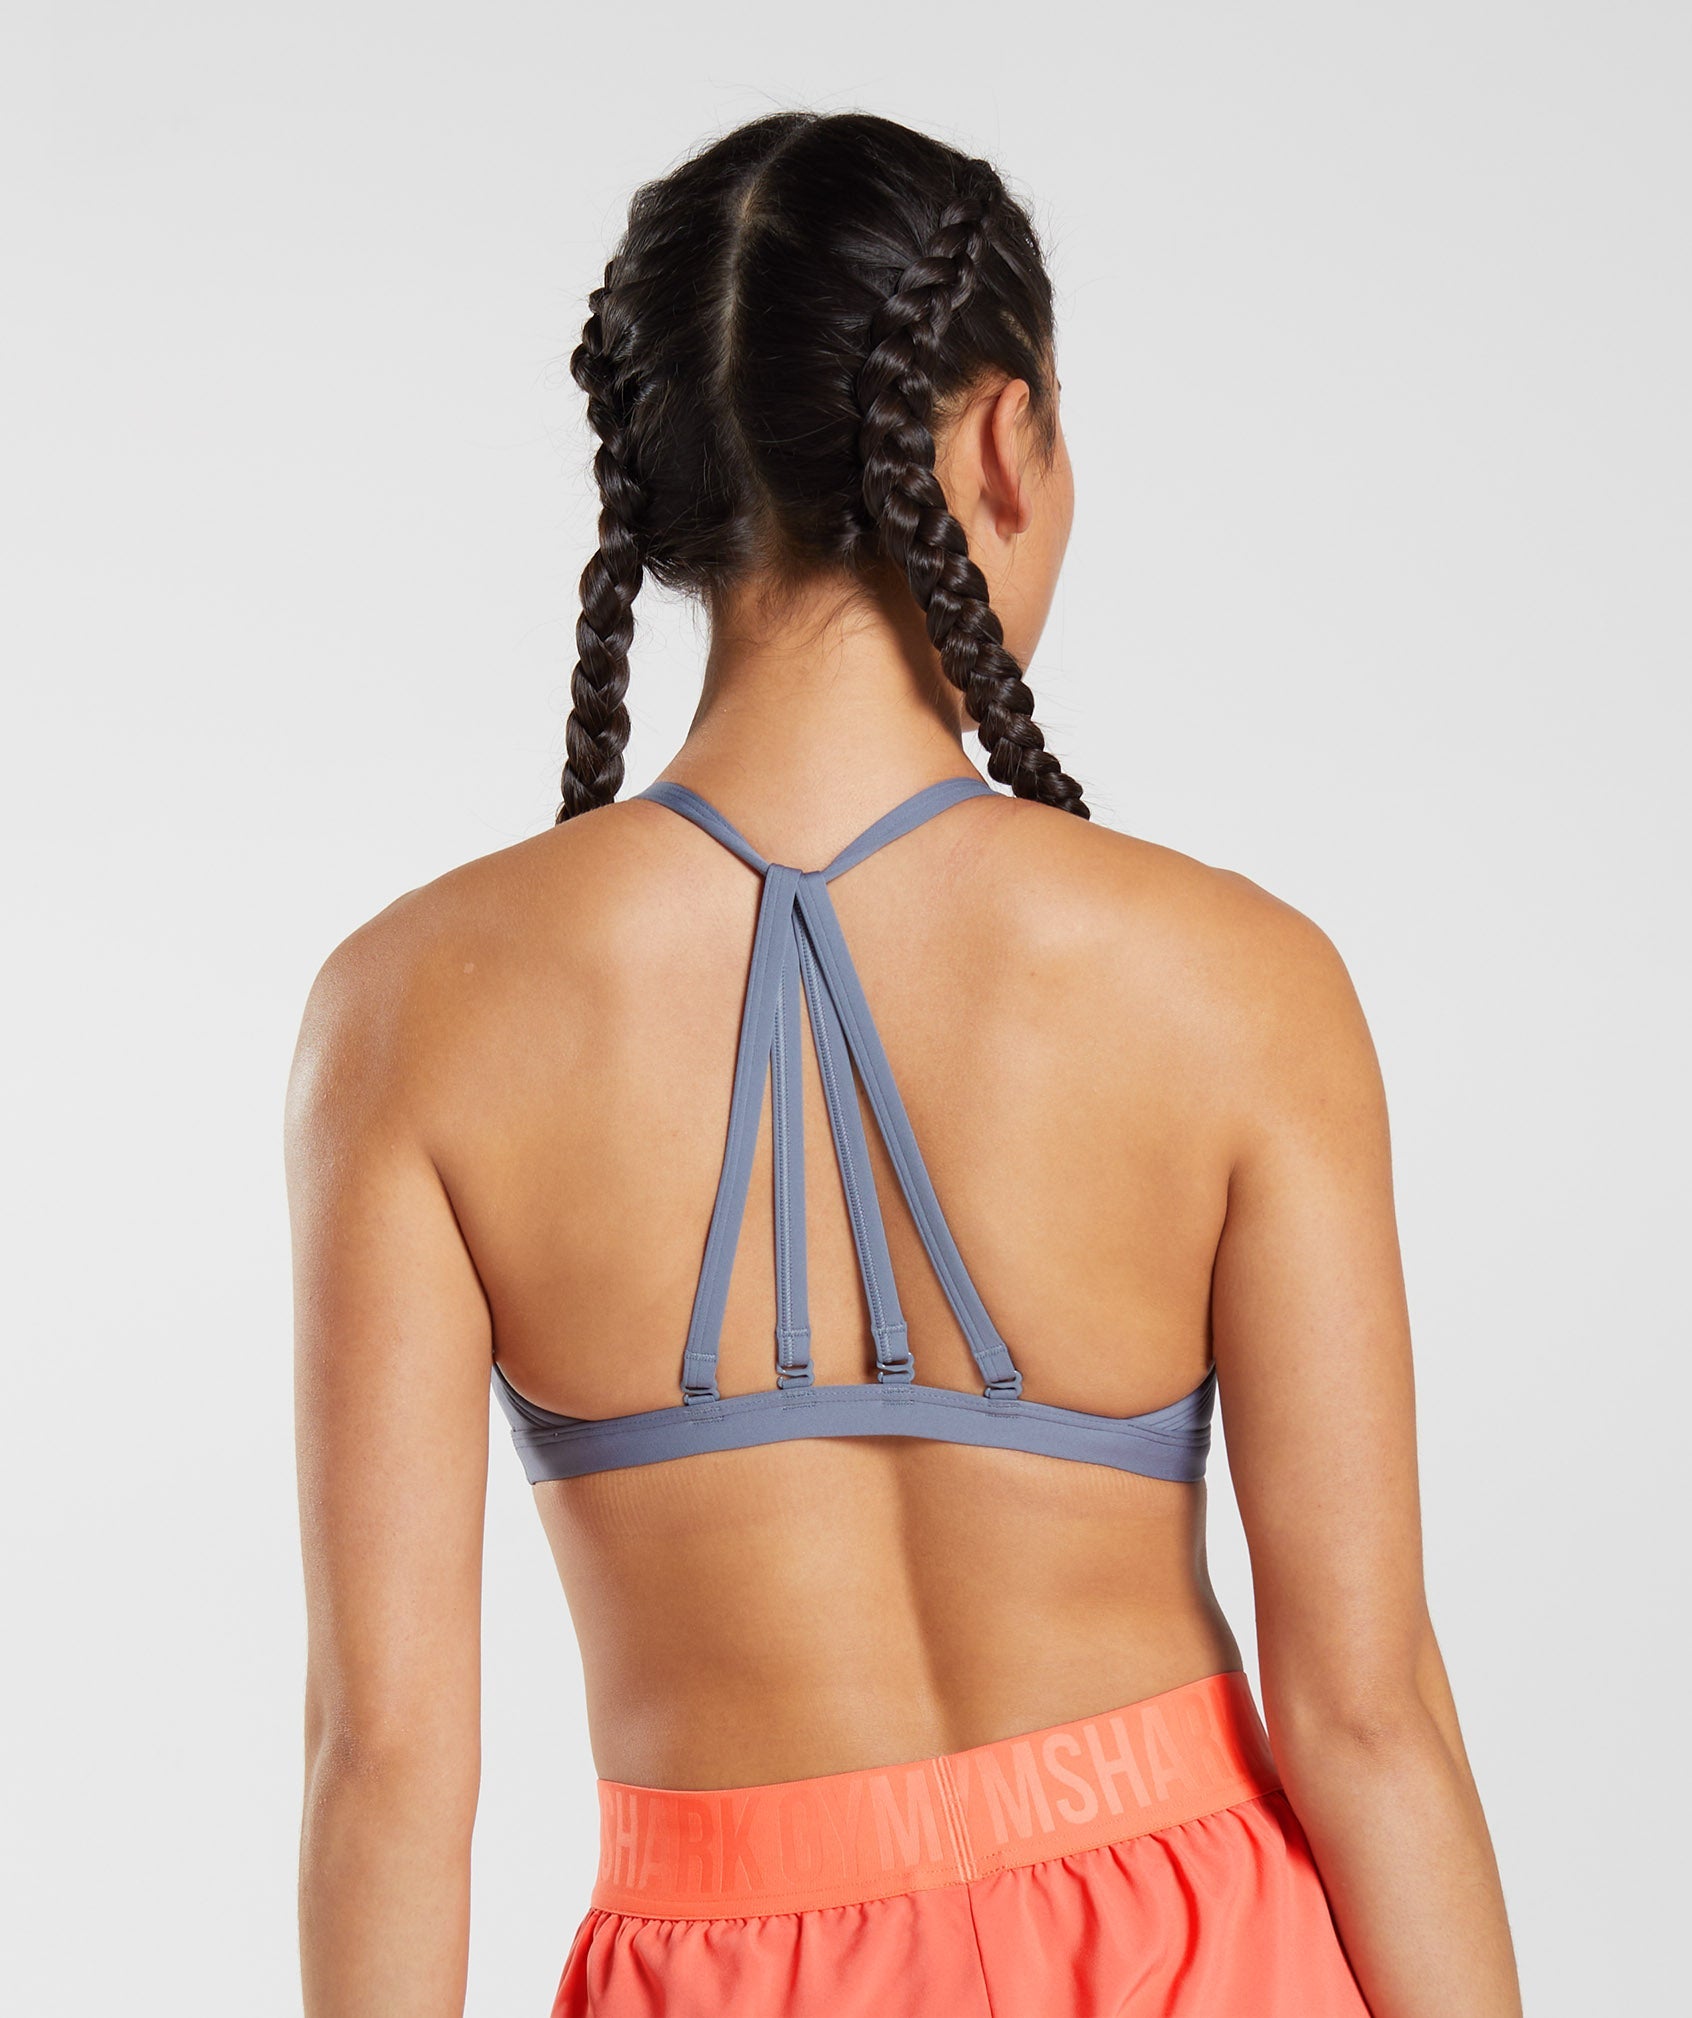 BANDEAU Minimal Sports Bra Backless Removable Women Outfits